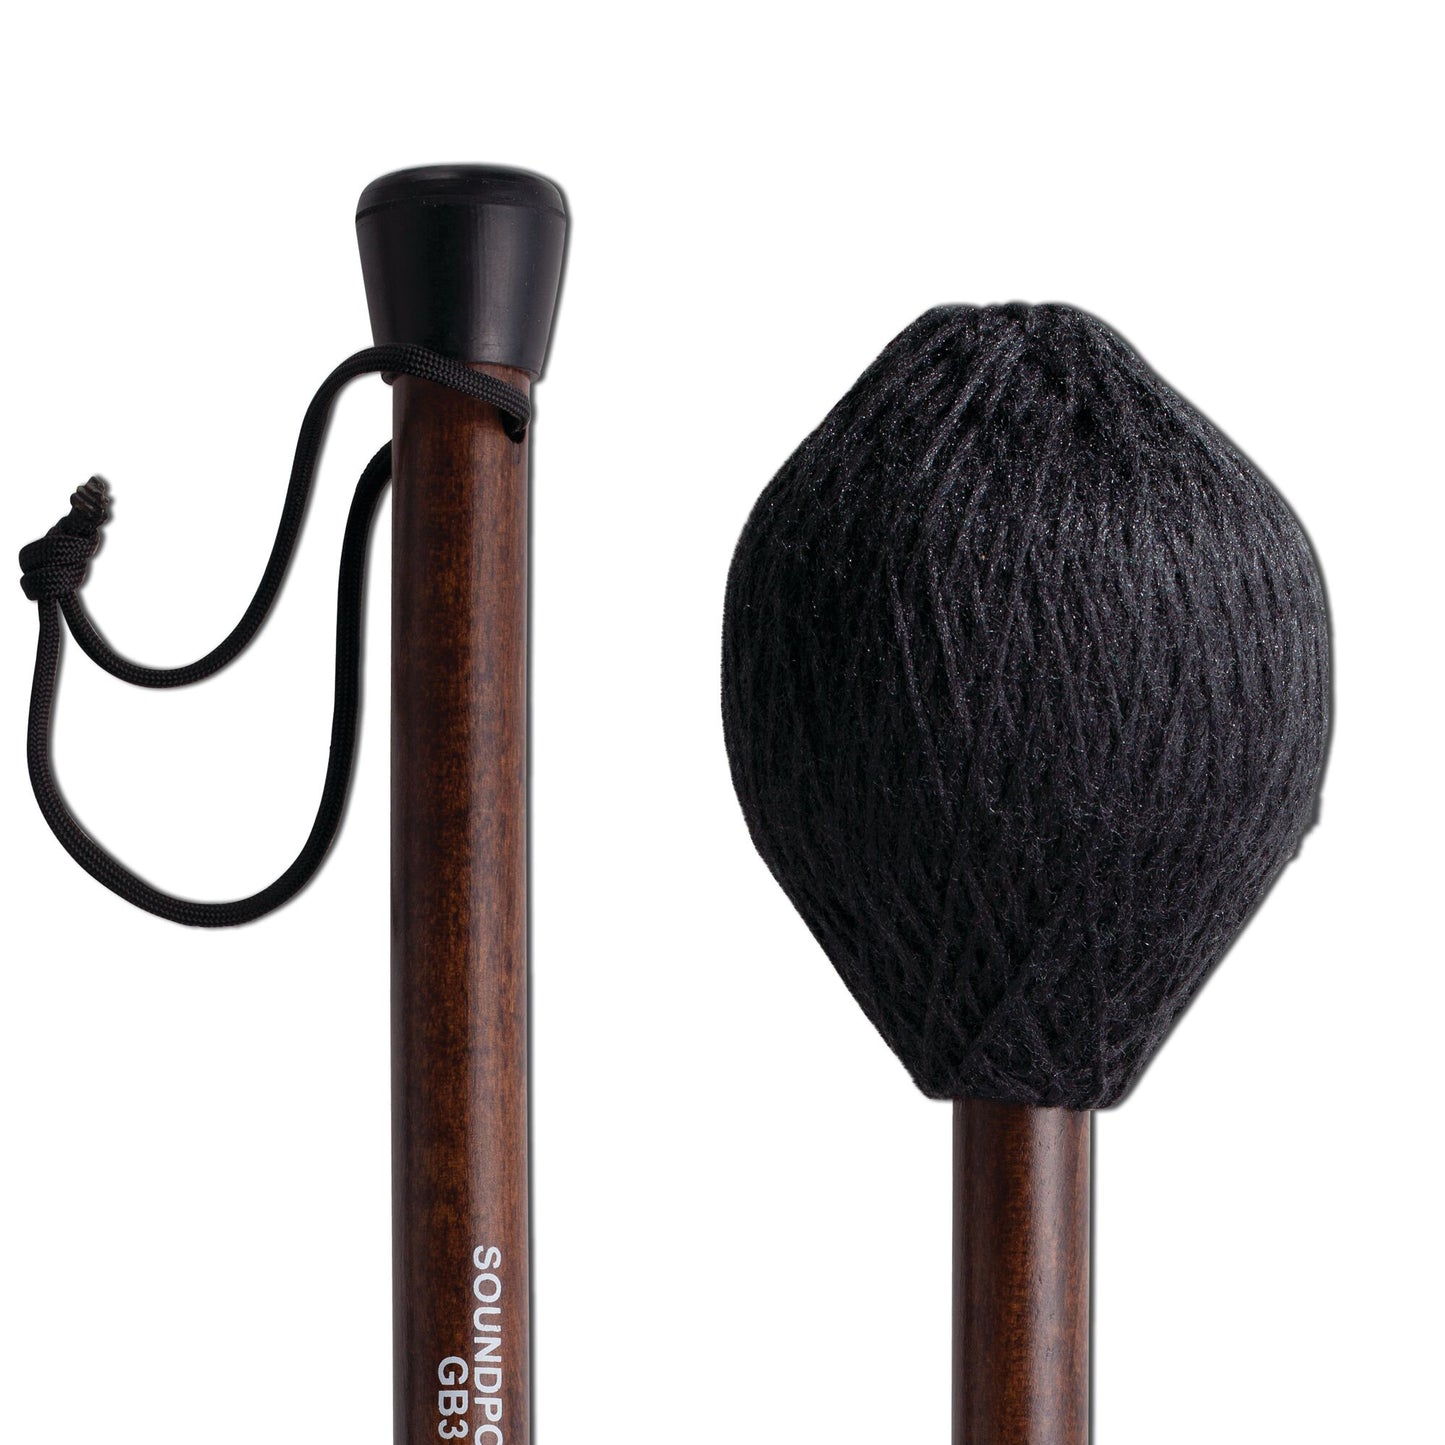 GB3 - Soundpower Heavy Gong Beater Mallets